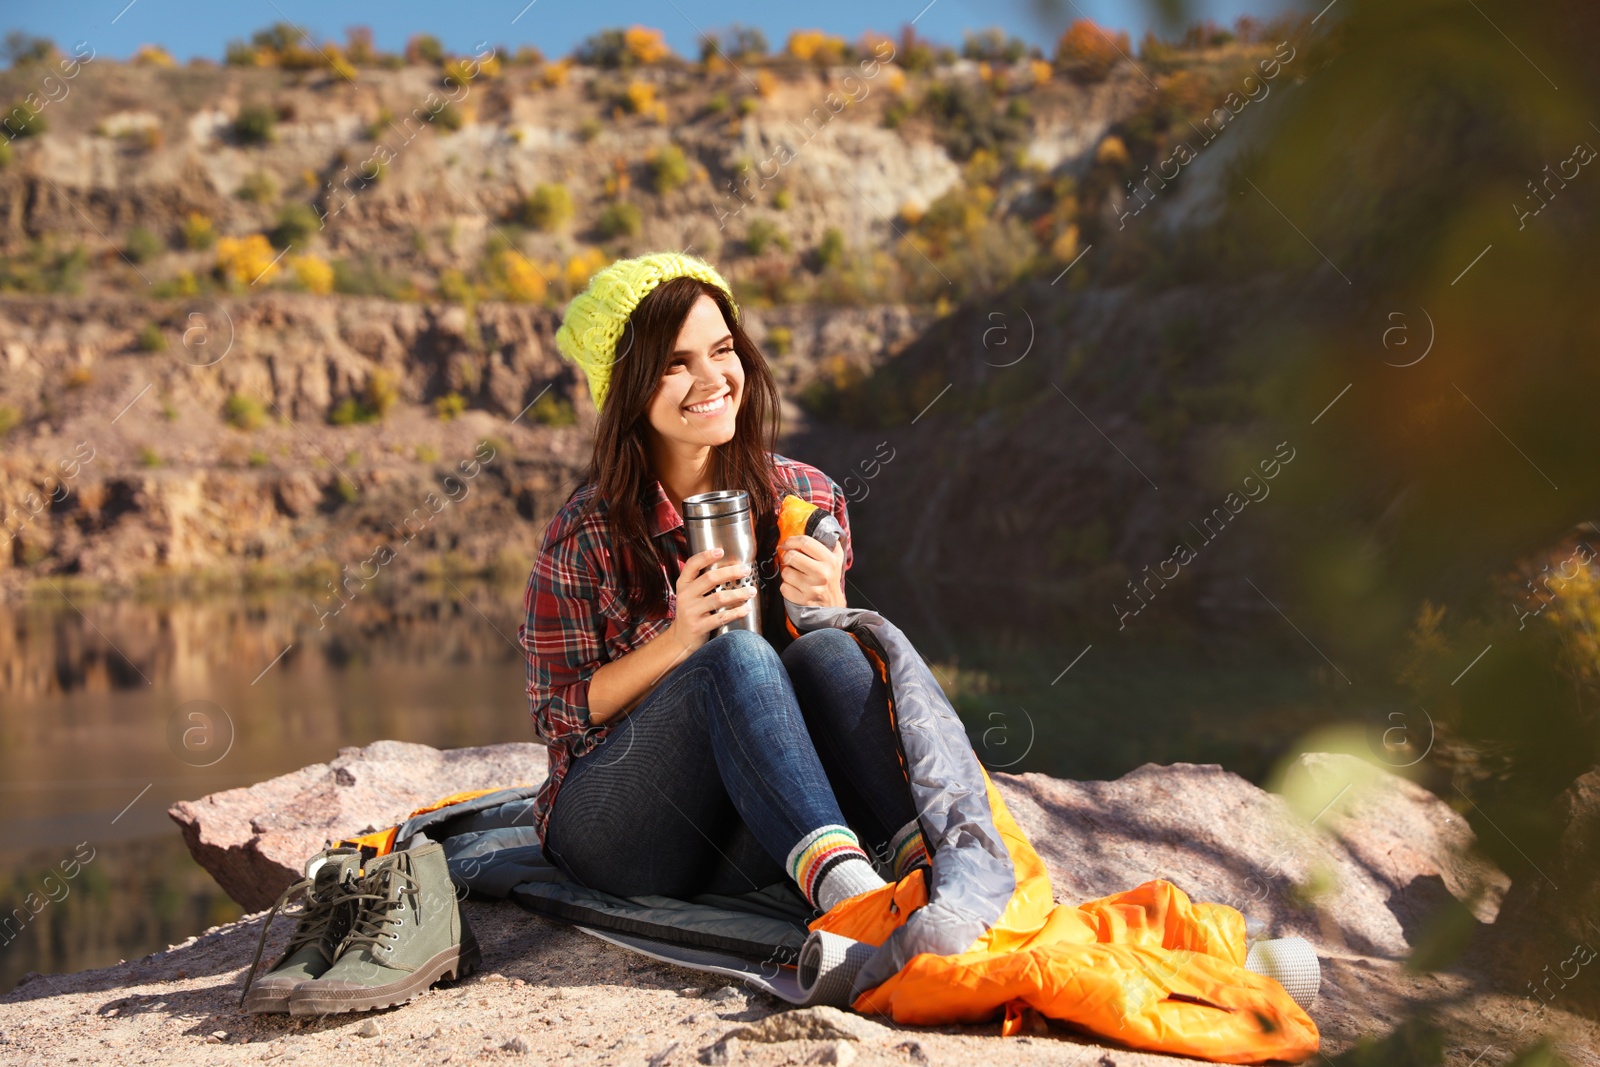 Photo of Female camper with thermos sitting on sleeping bag in wilderness